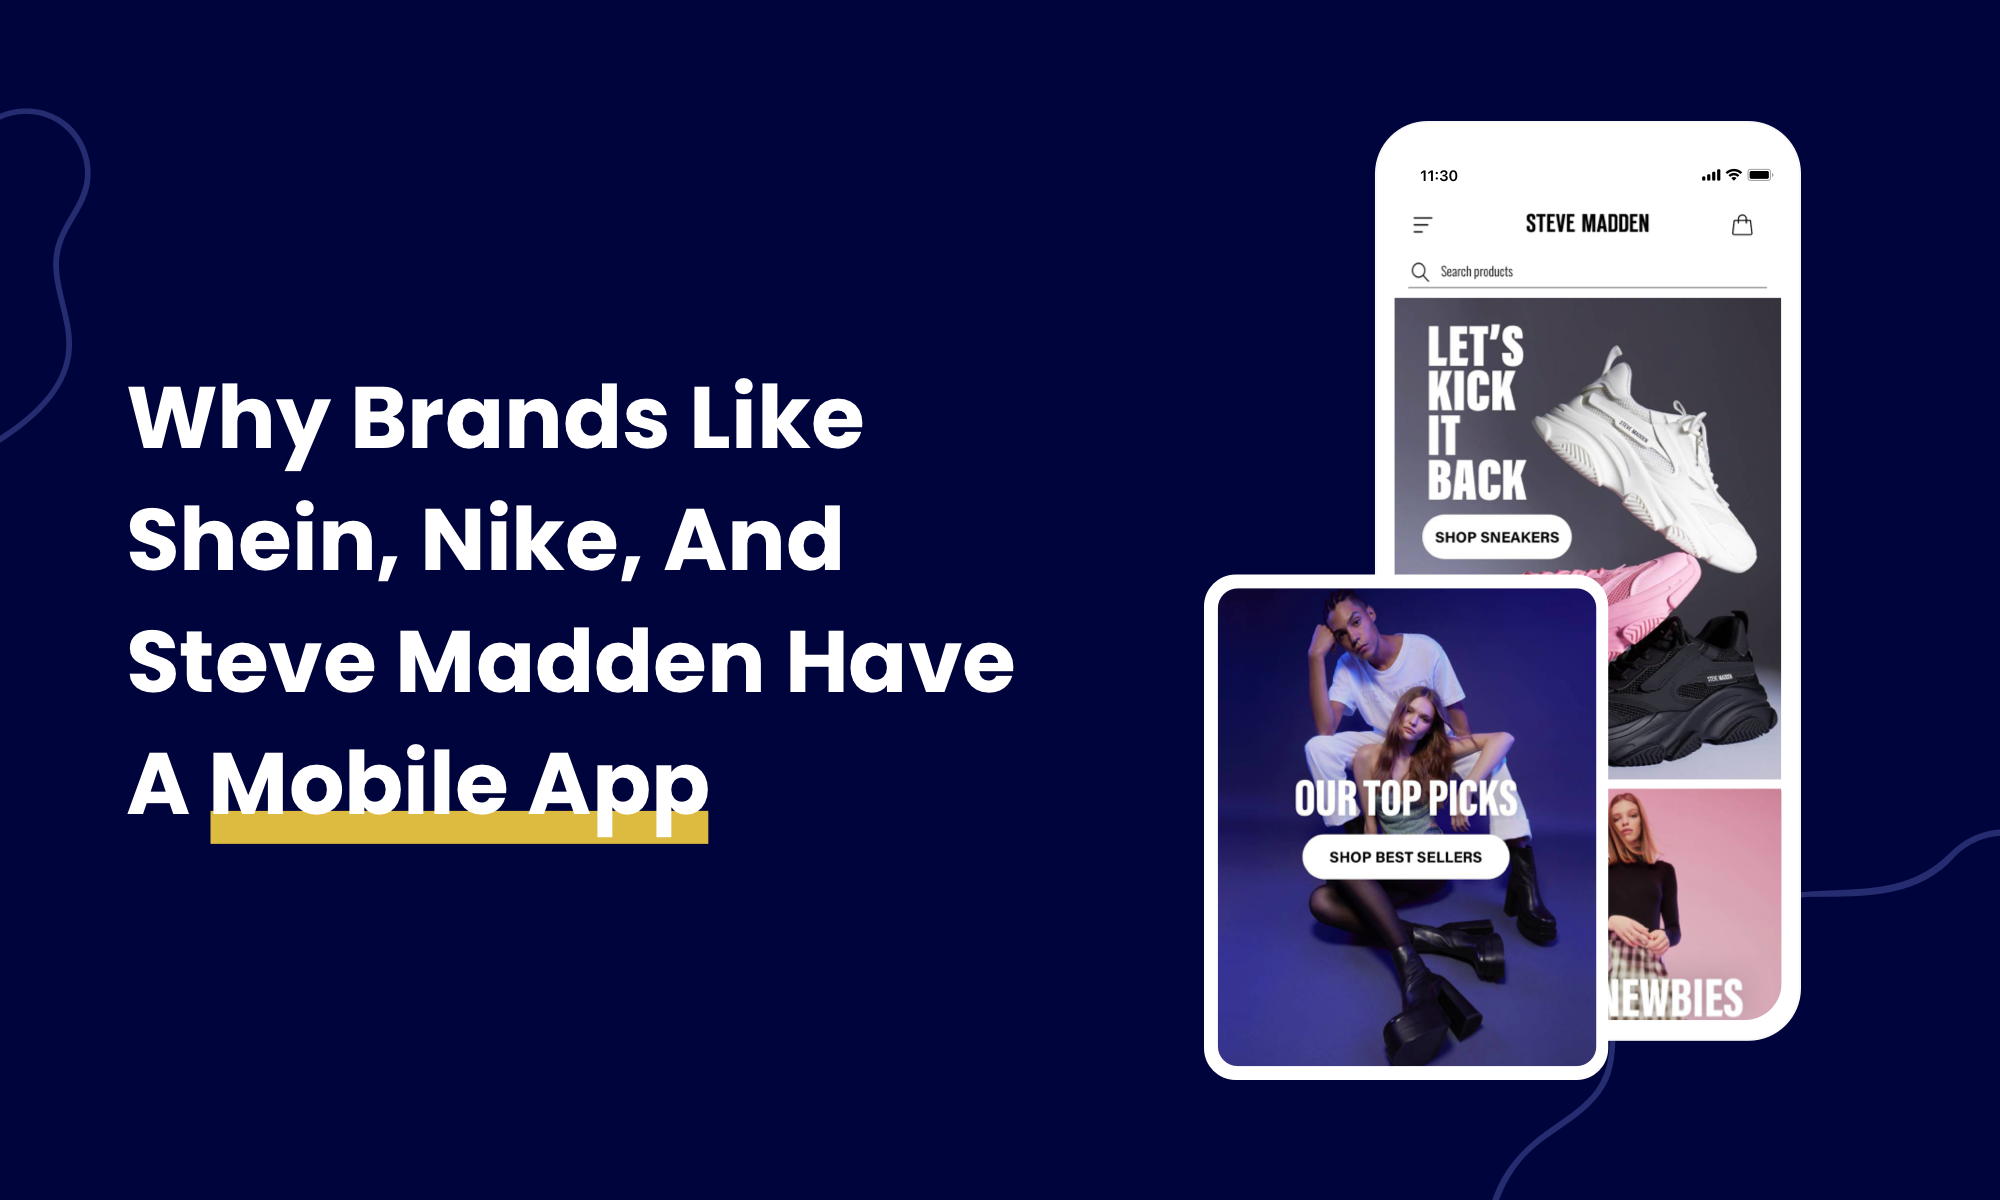 Why Brands Like Shein, Nike, and Steve Madden Have a Mobile App